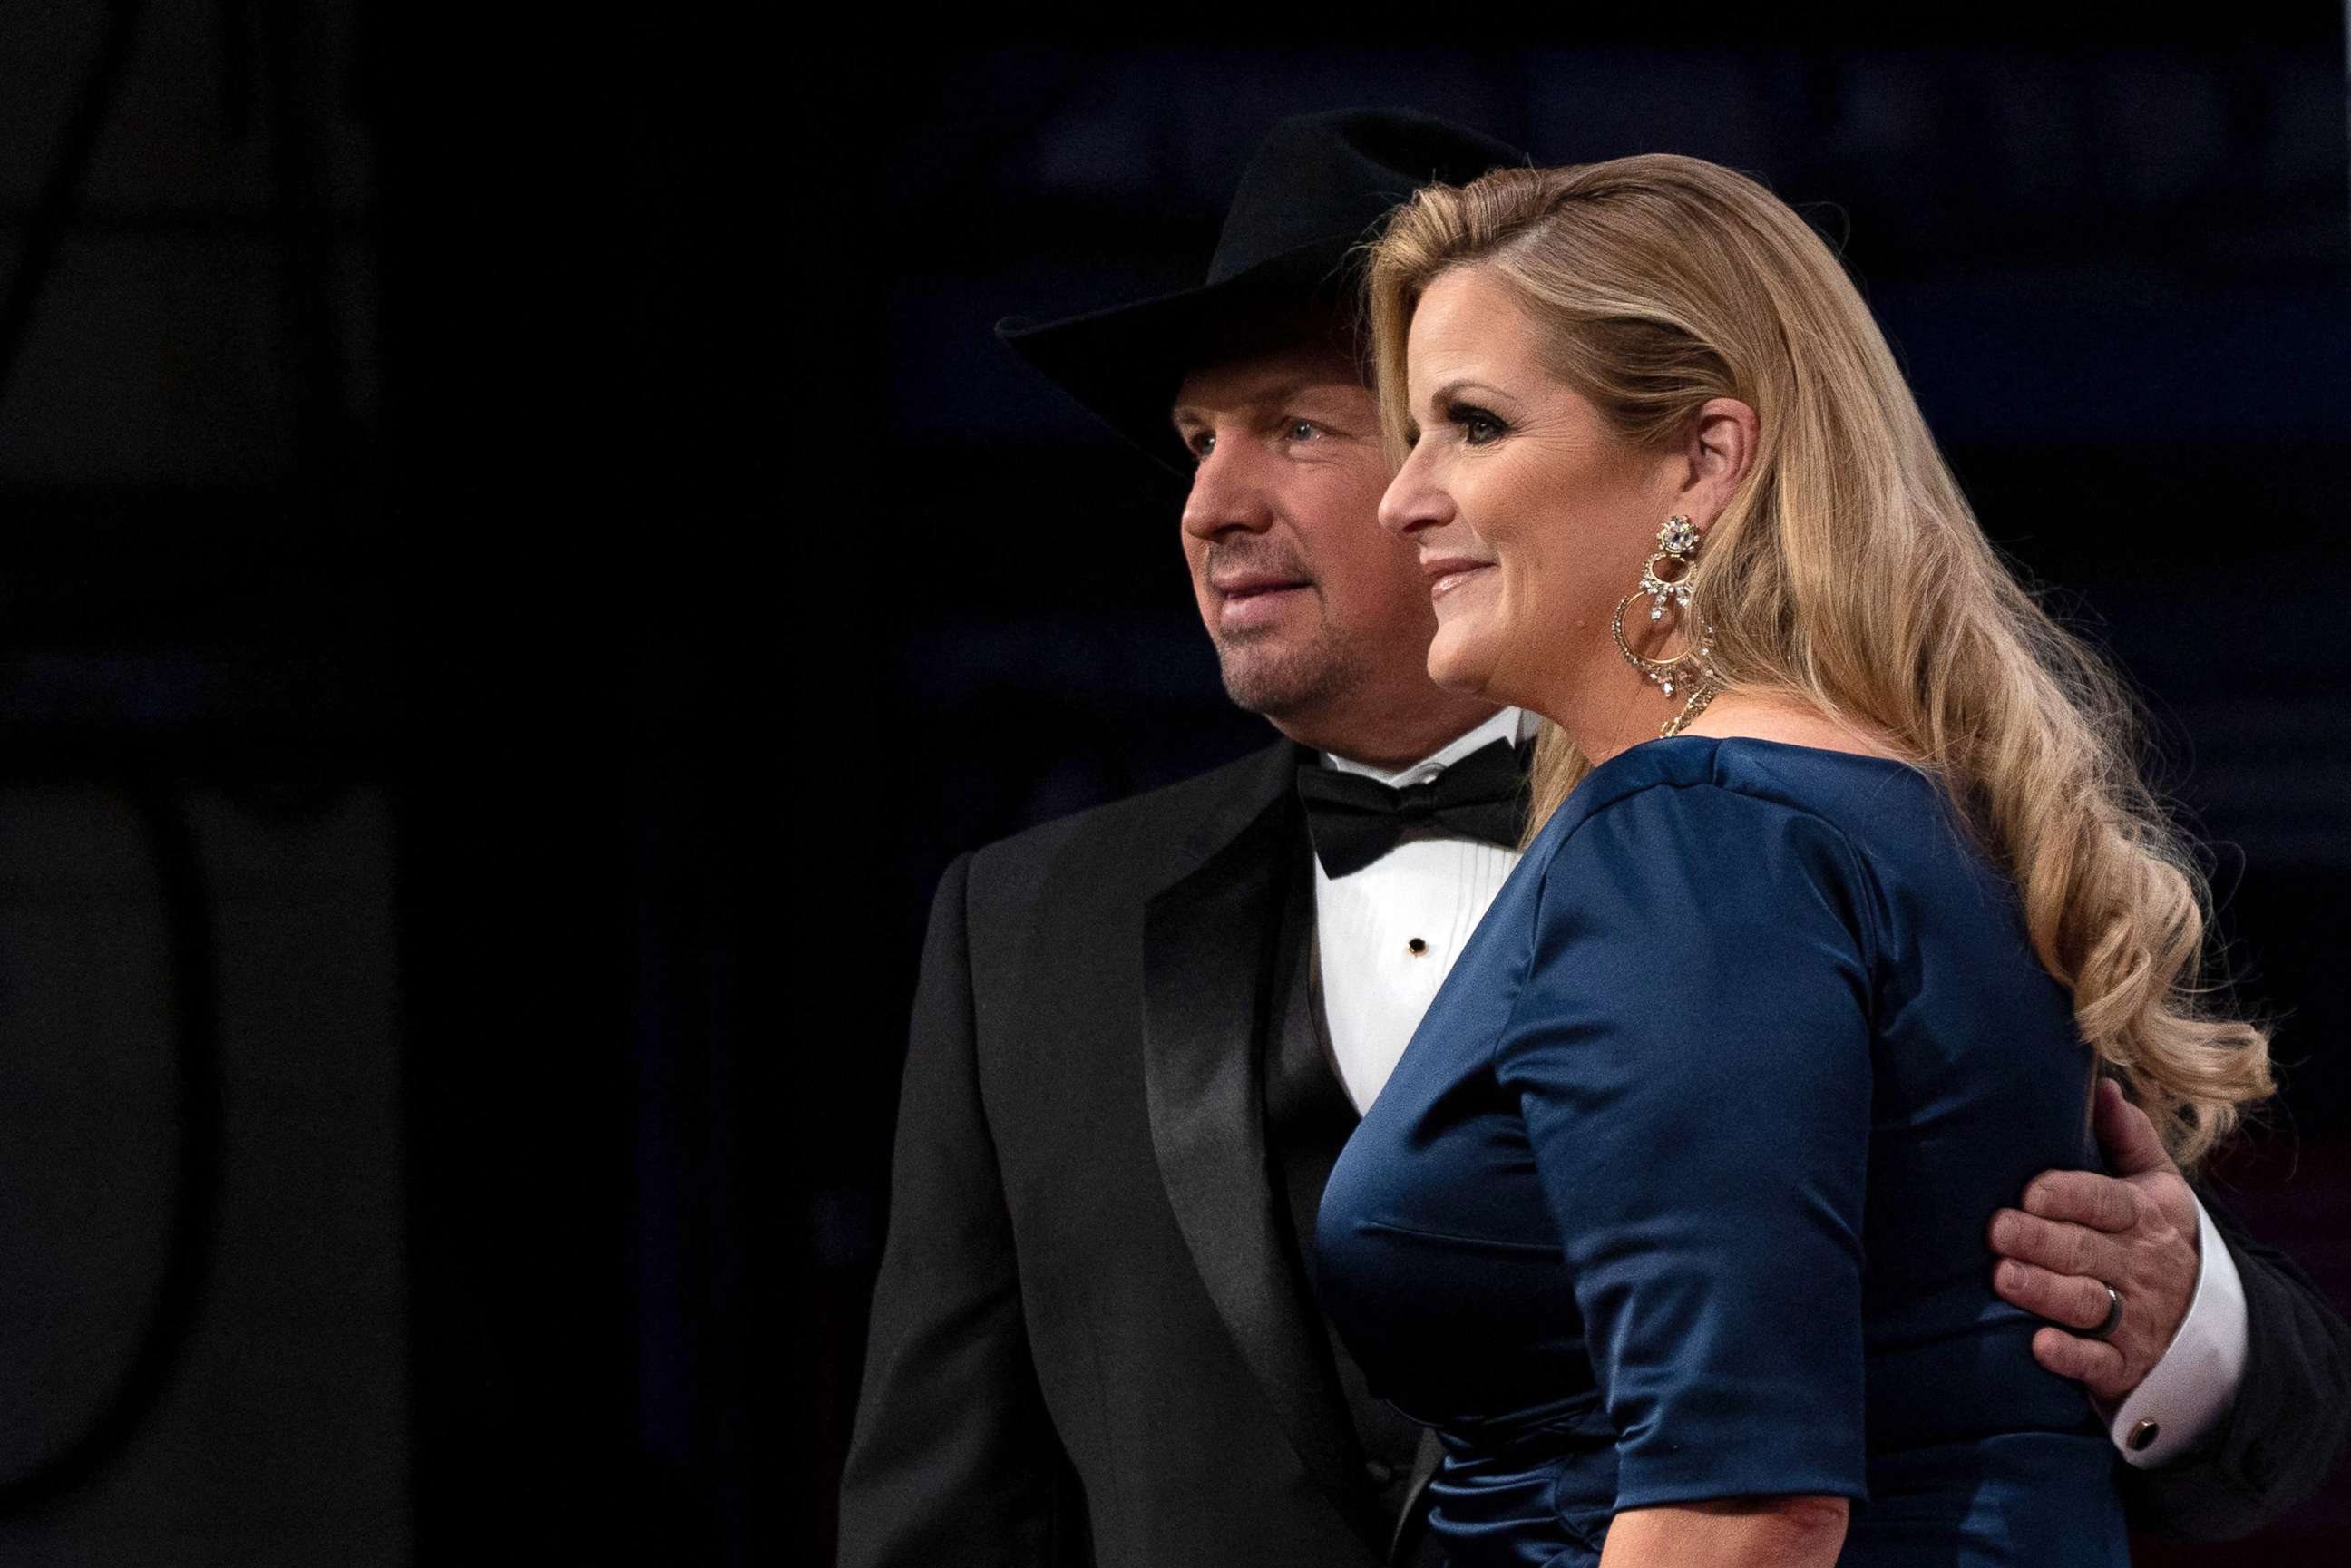 PHOTO: Garth Brooks and Trisha Yearwood attend the 43rd Annual Kennedy Center Honors at The Kennedy Center on May 21, 2021 in Washington, D.C.